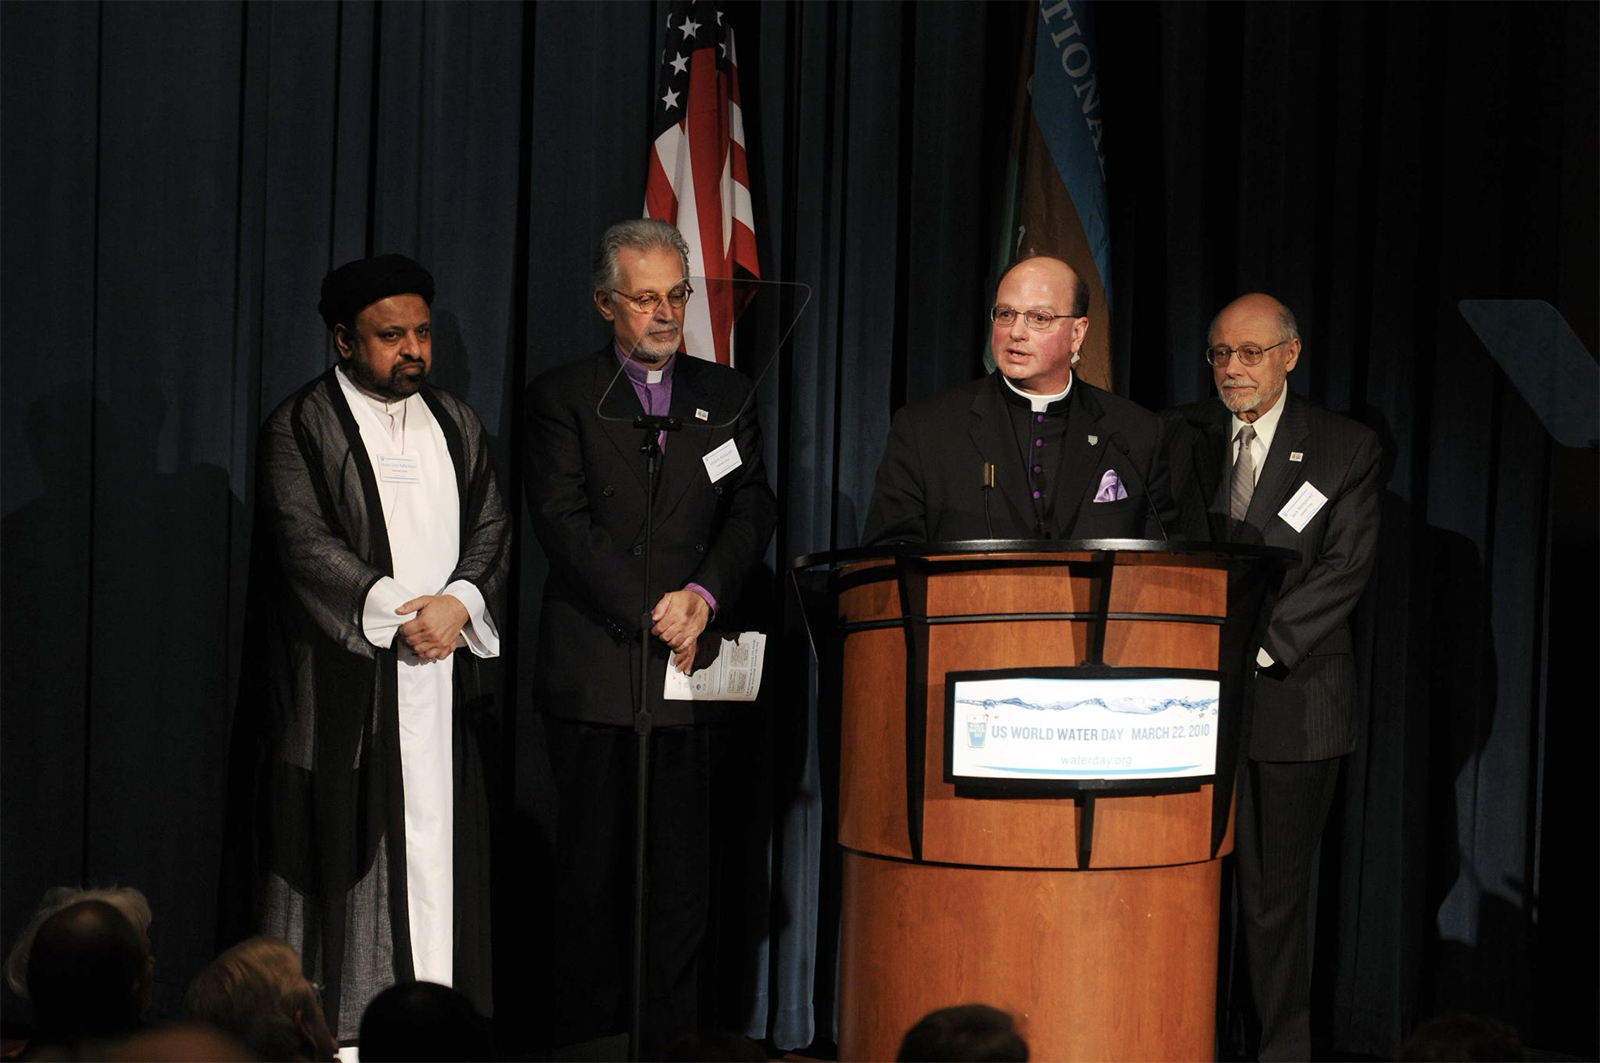 Muslim, Armentian Orthodox, Episcopalian and Jewish faith leaders participate in a World Water Day event at National Geographic headquarters in Washington, D.C., on March 22, 2010. (Photo by Susan K. Barnett)